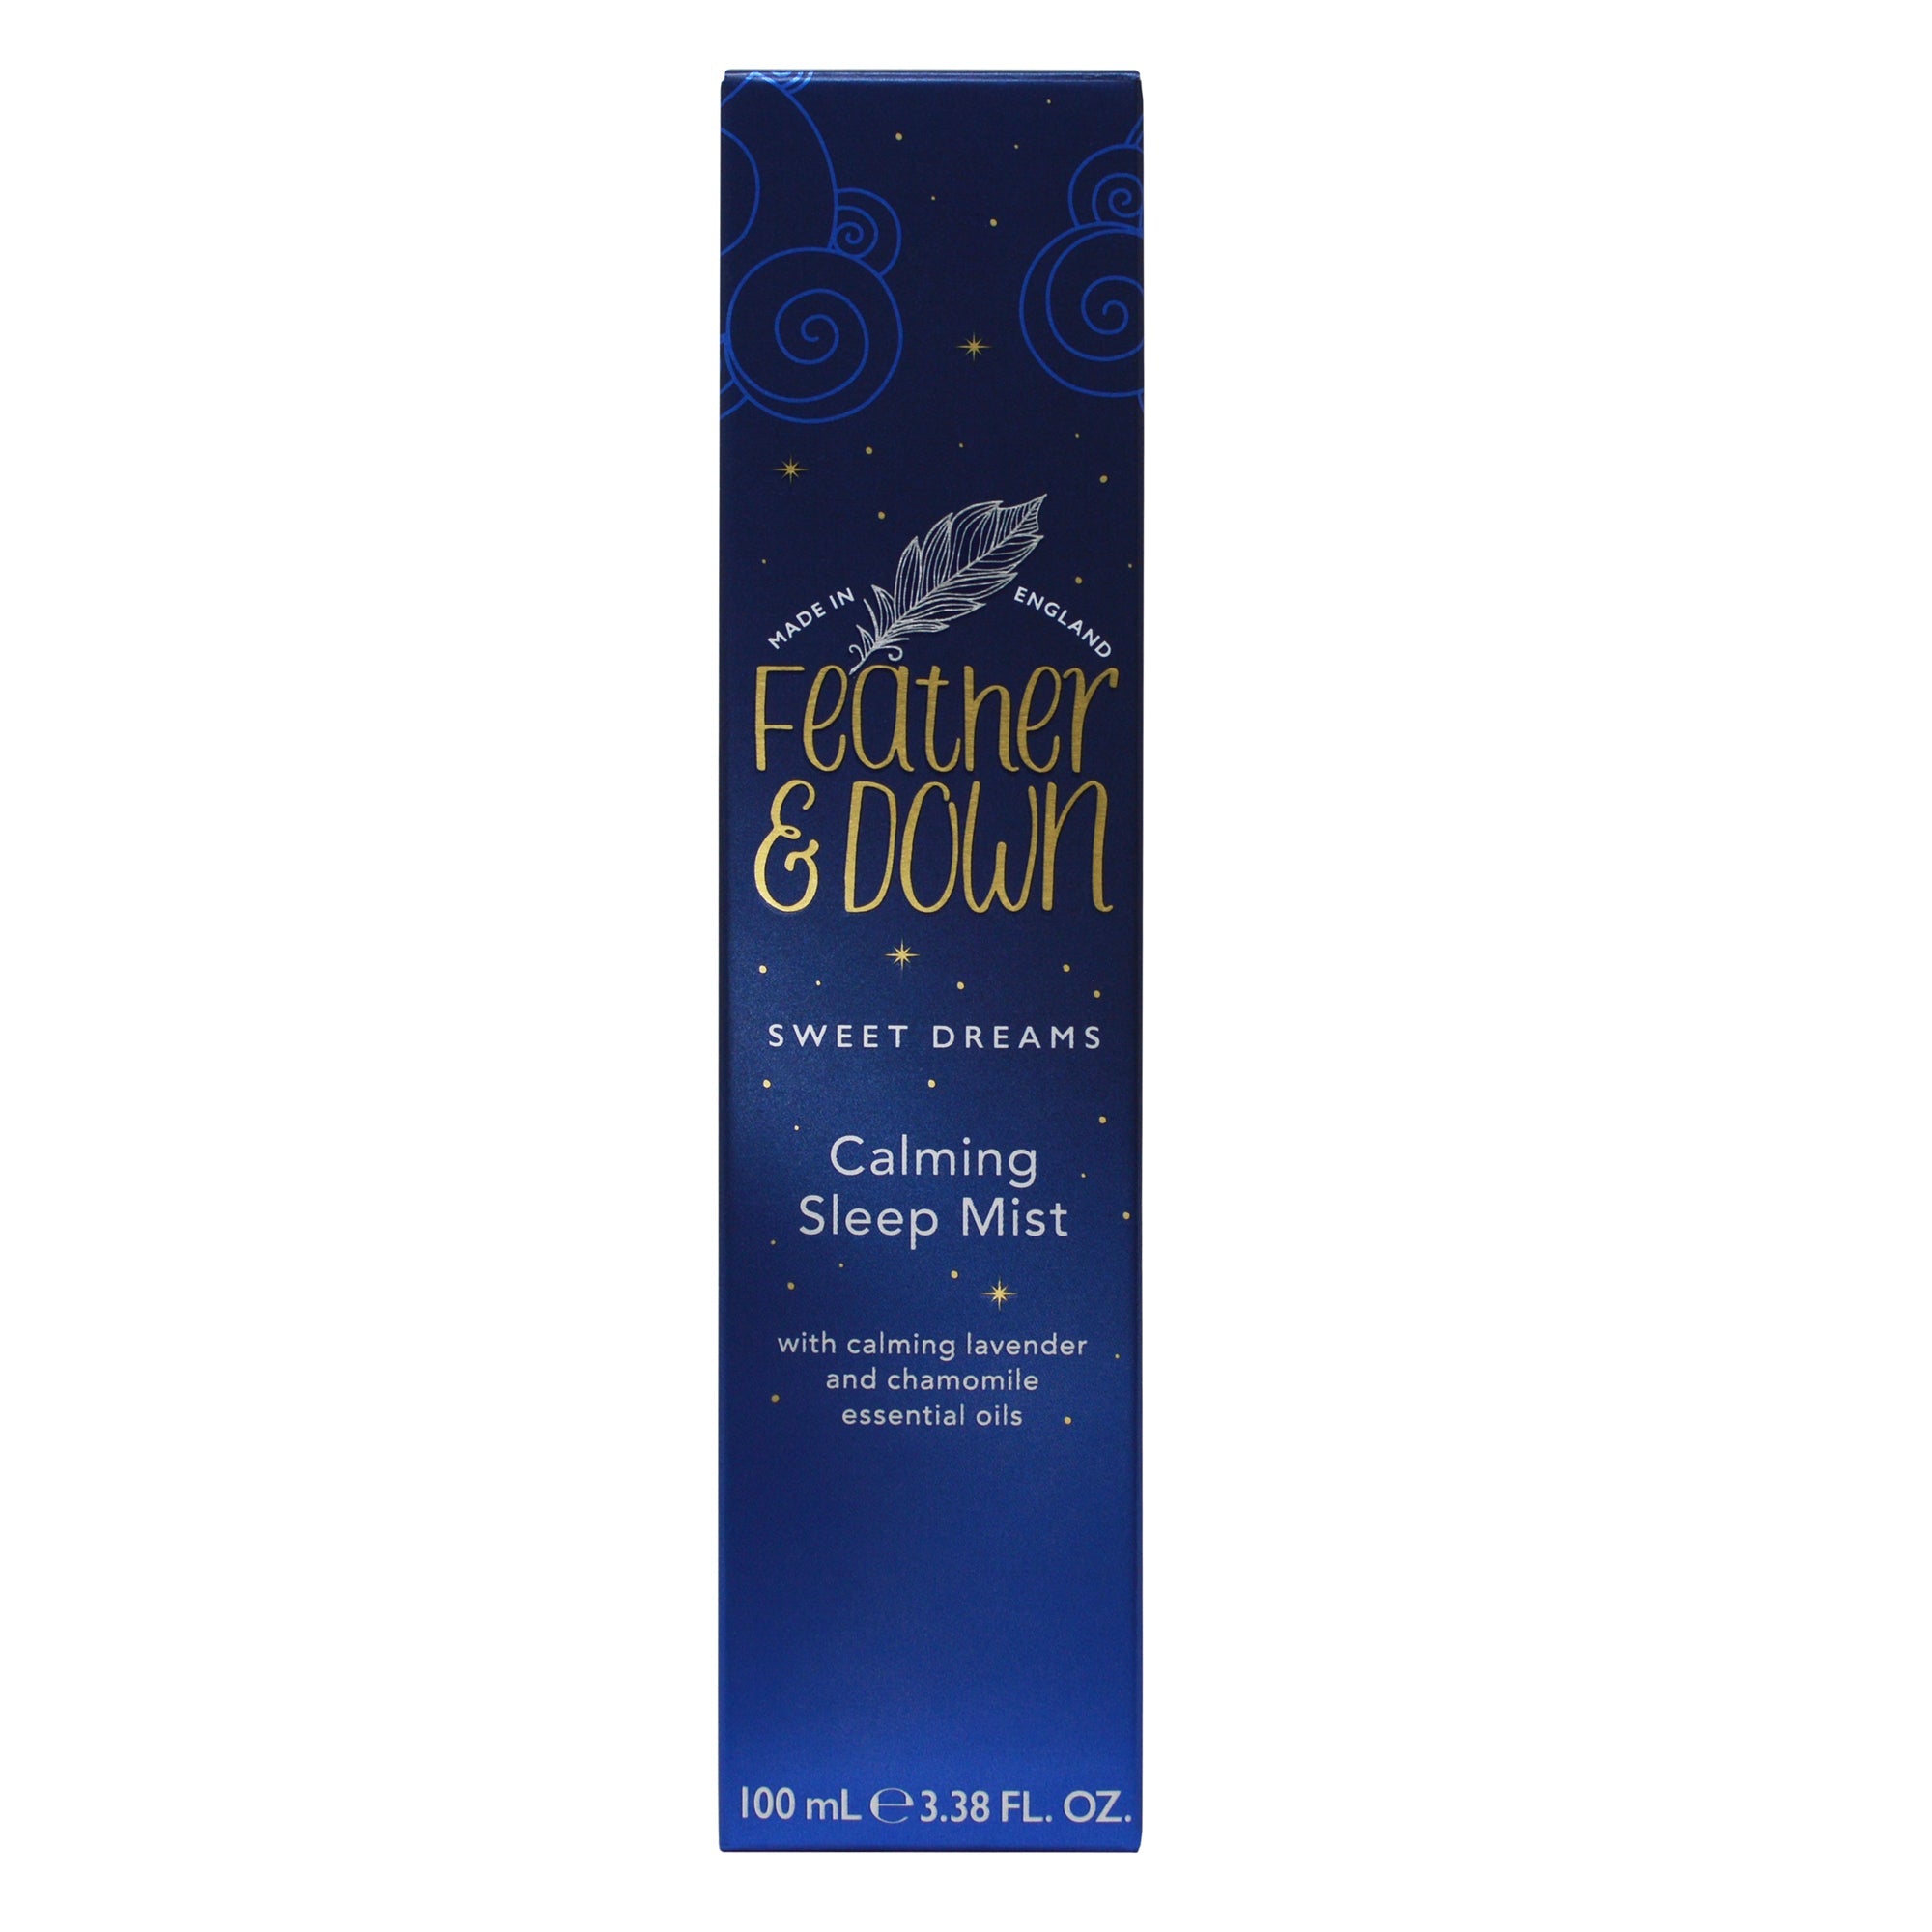 Calming Sleep Mist For Face & Body - Feather and Down 